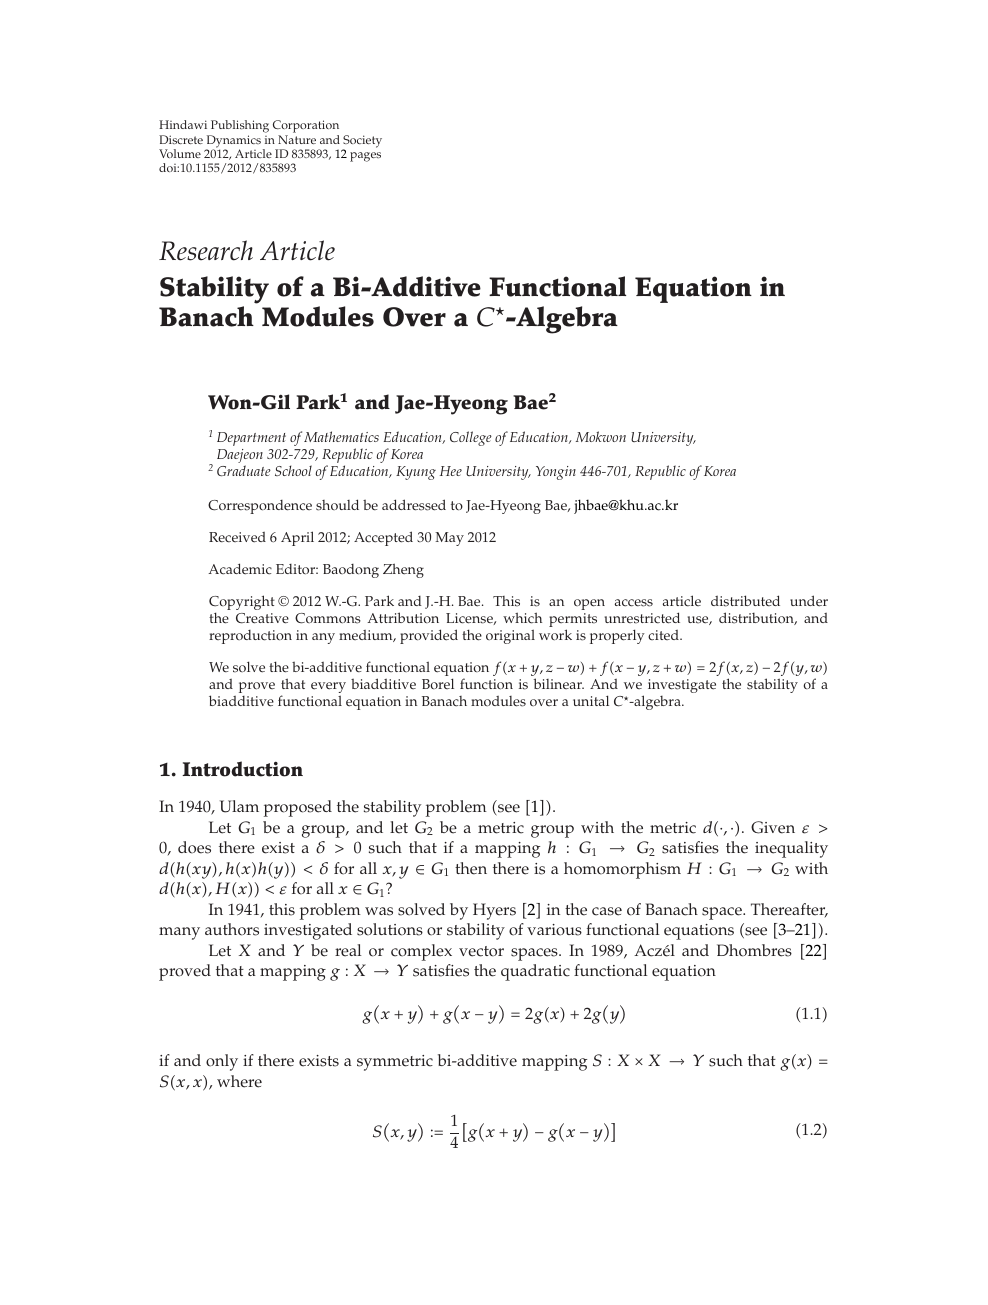 Stability Of A Bi Additive Functional Equation In Banach Modules Over A C Algebra Topic Of Research Paper In Mathematics Download Scholarly Article Pdf And Read For Free On Cyberleninka Open